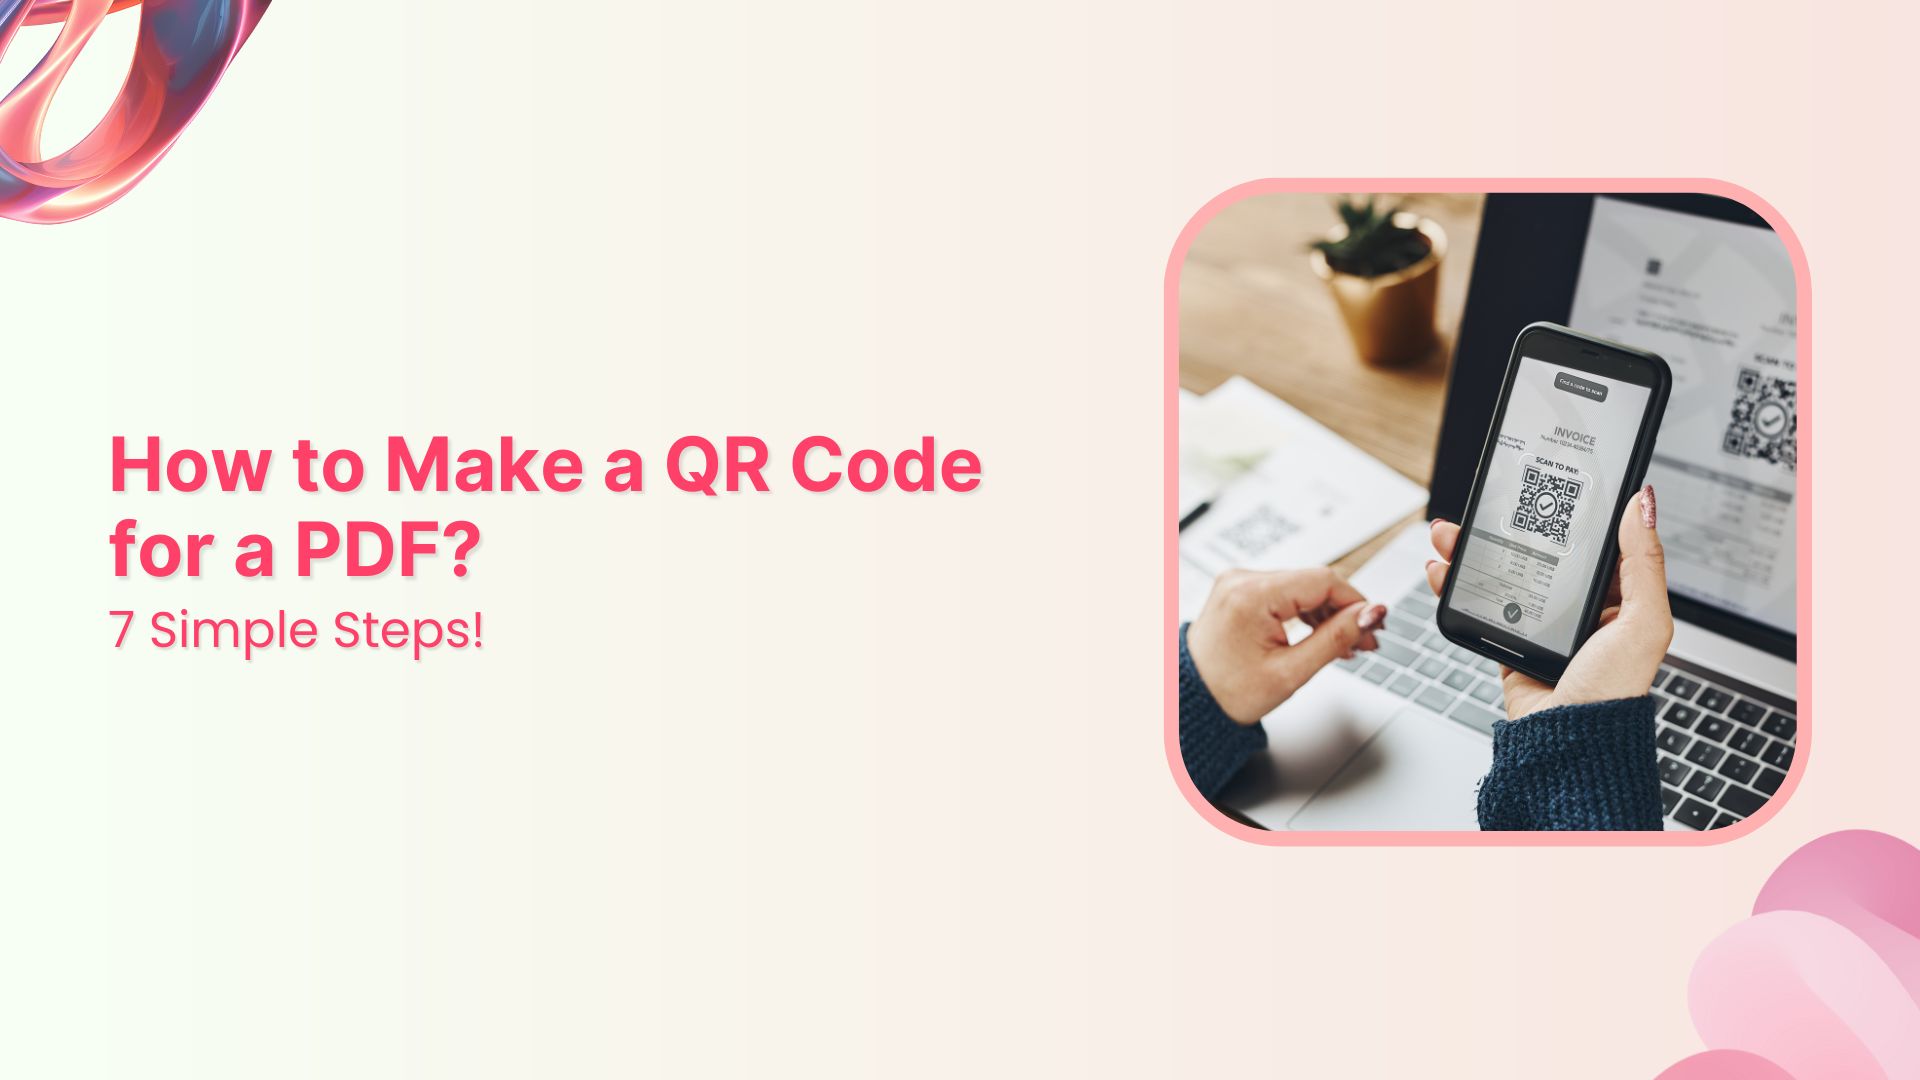 How to Make a QR Code for a PDF: 7 Simple Steps